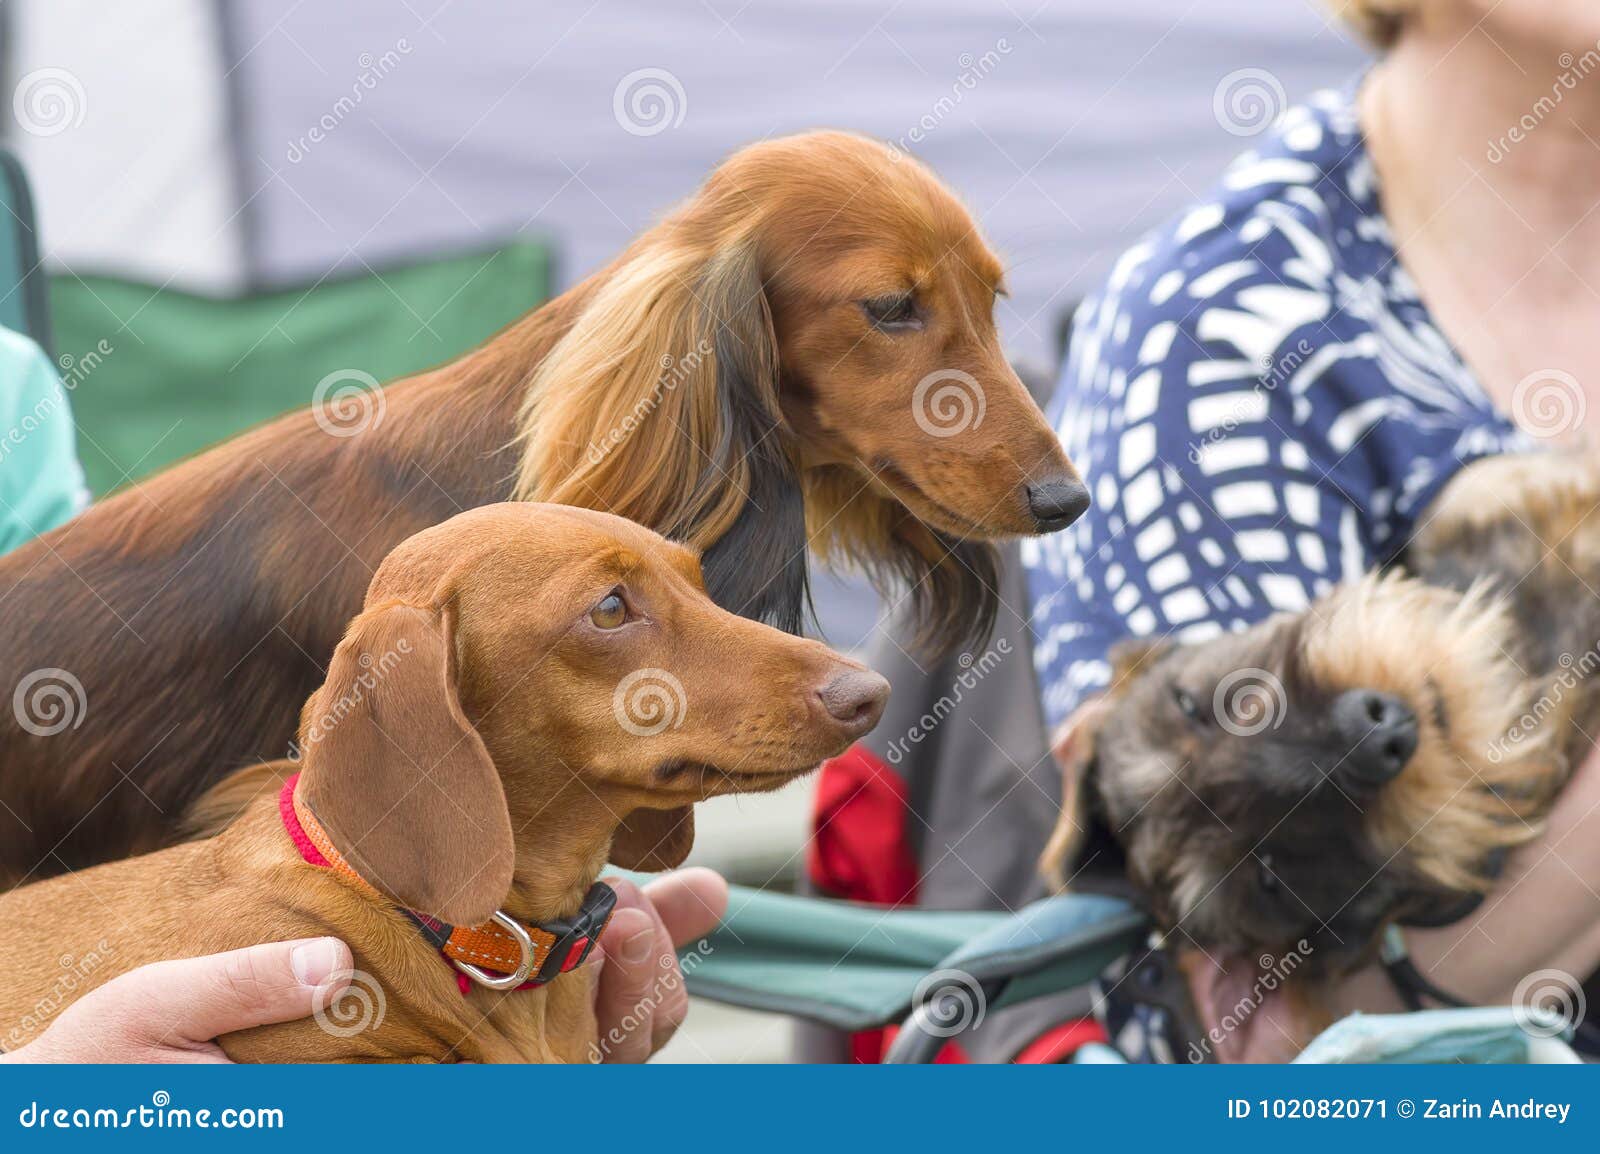 Typical Dachshund Close-up stock image. Image of friend - 102082071